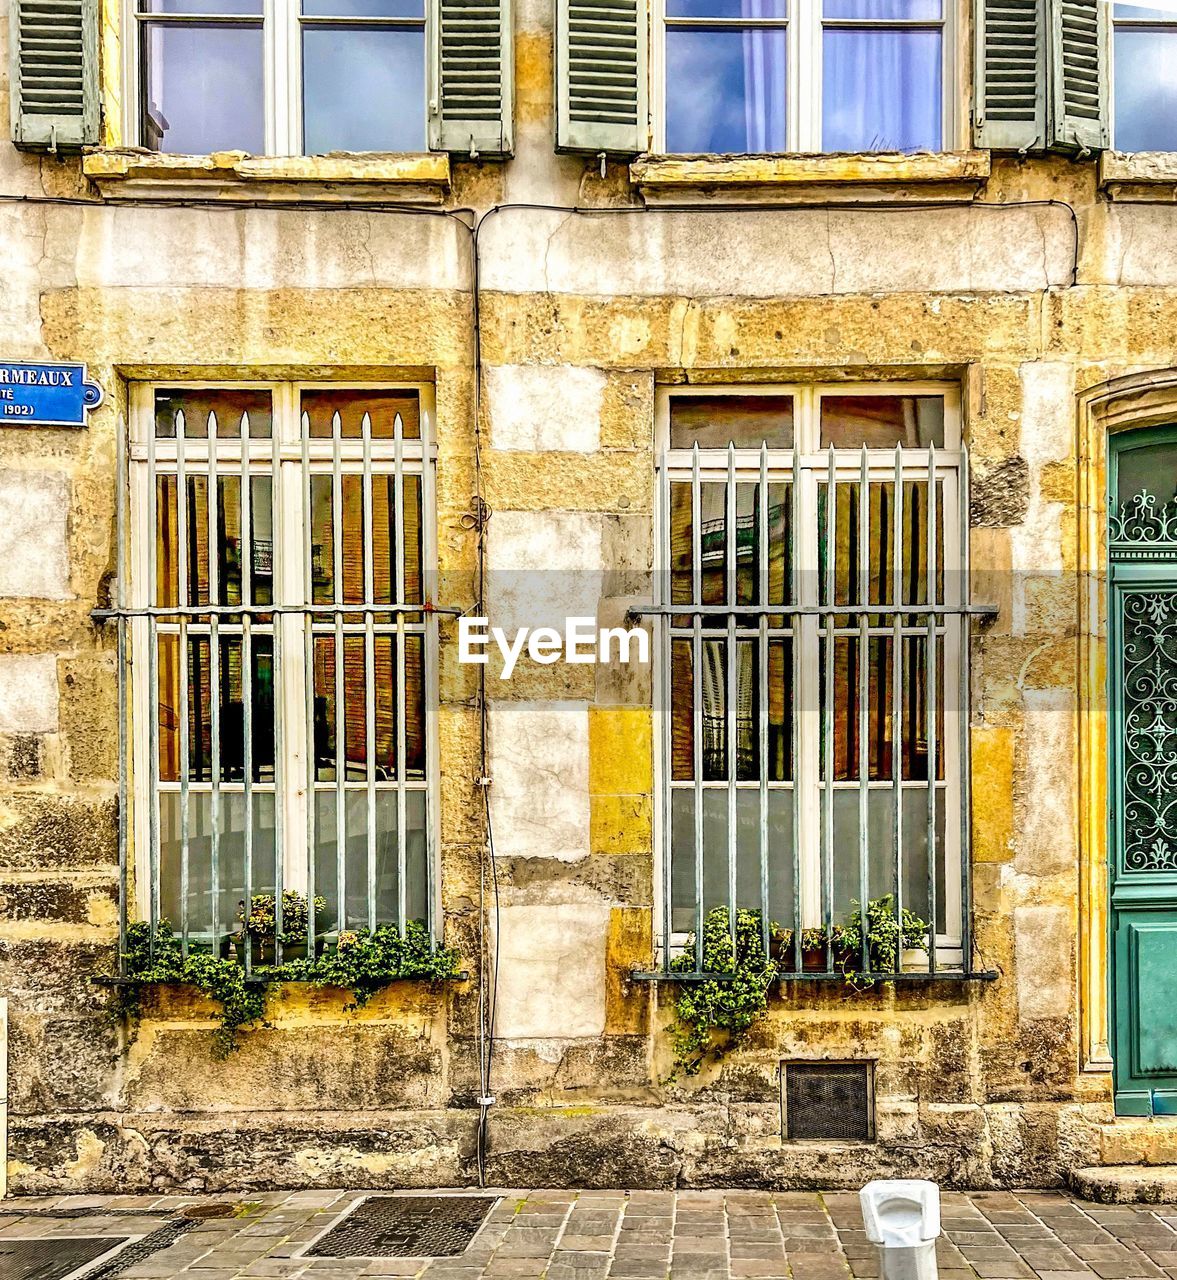 architecture, building exterior, built structure, window, building, neighbourhood, facade, urban area, estate, house, residential area, residential district, no people, home, city, day, door, entrance, outdoors, closed, old, street, town